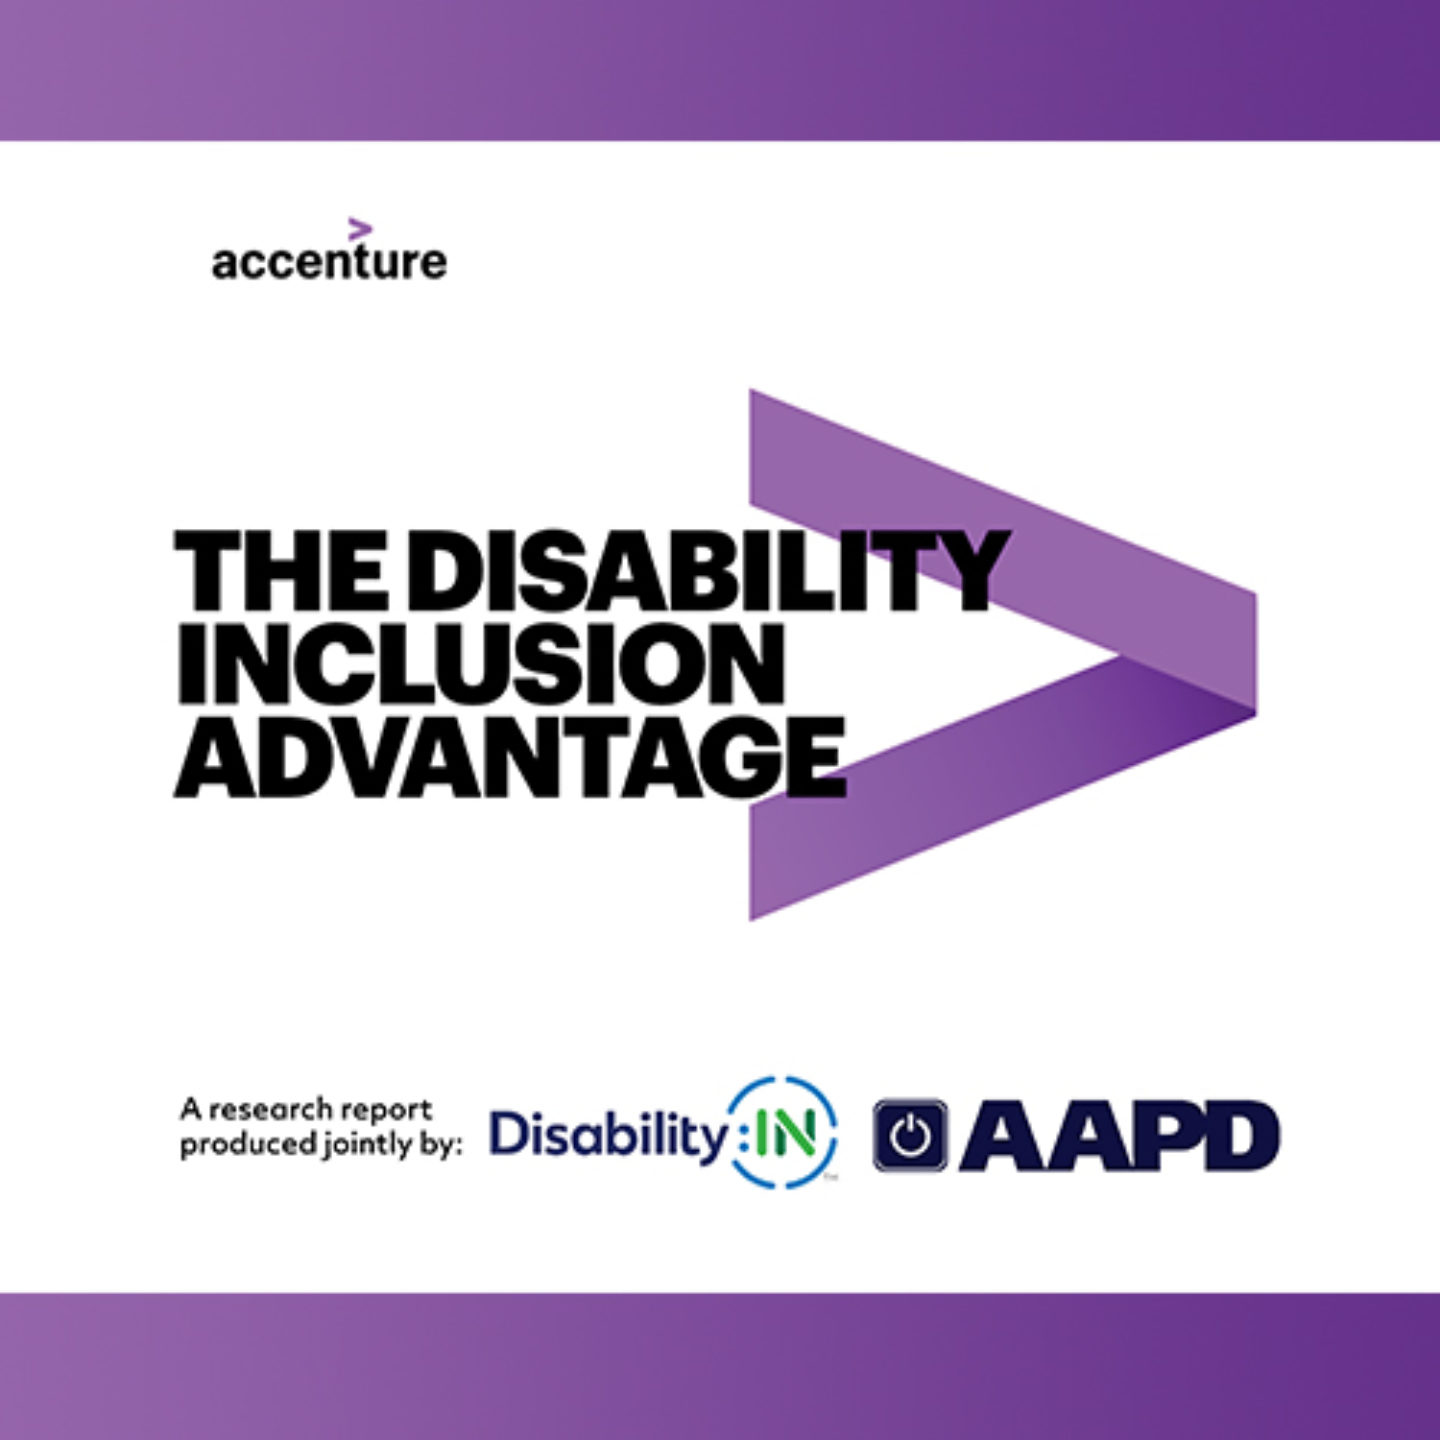 The Disability Inclusion Advantage cover with Accenture, Disability:IN & AAPD logos